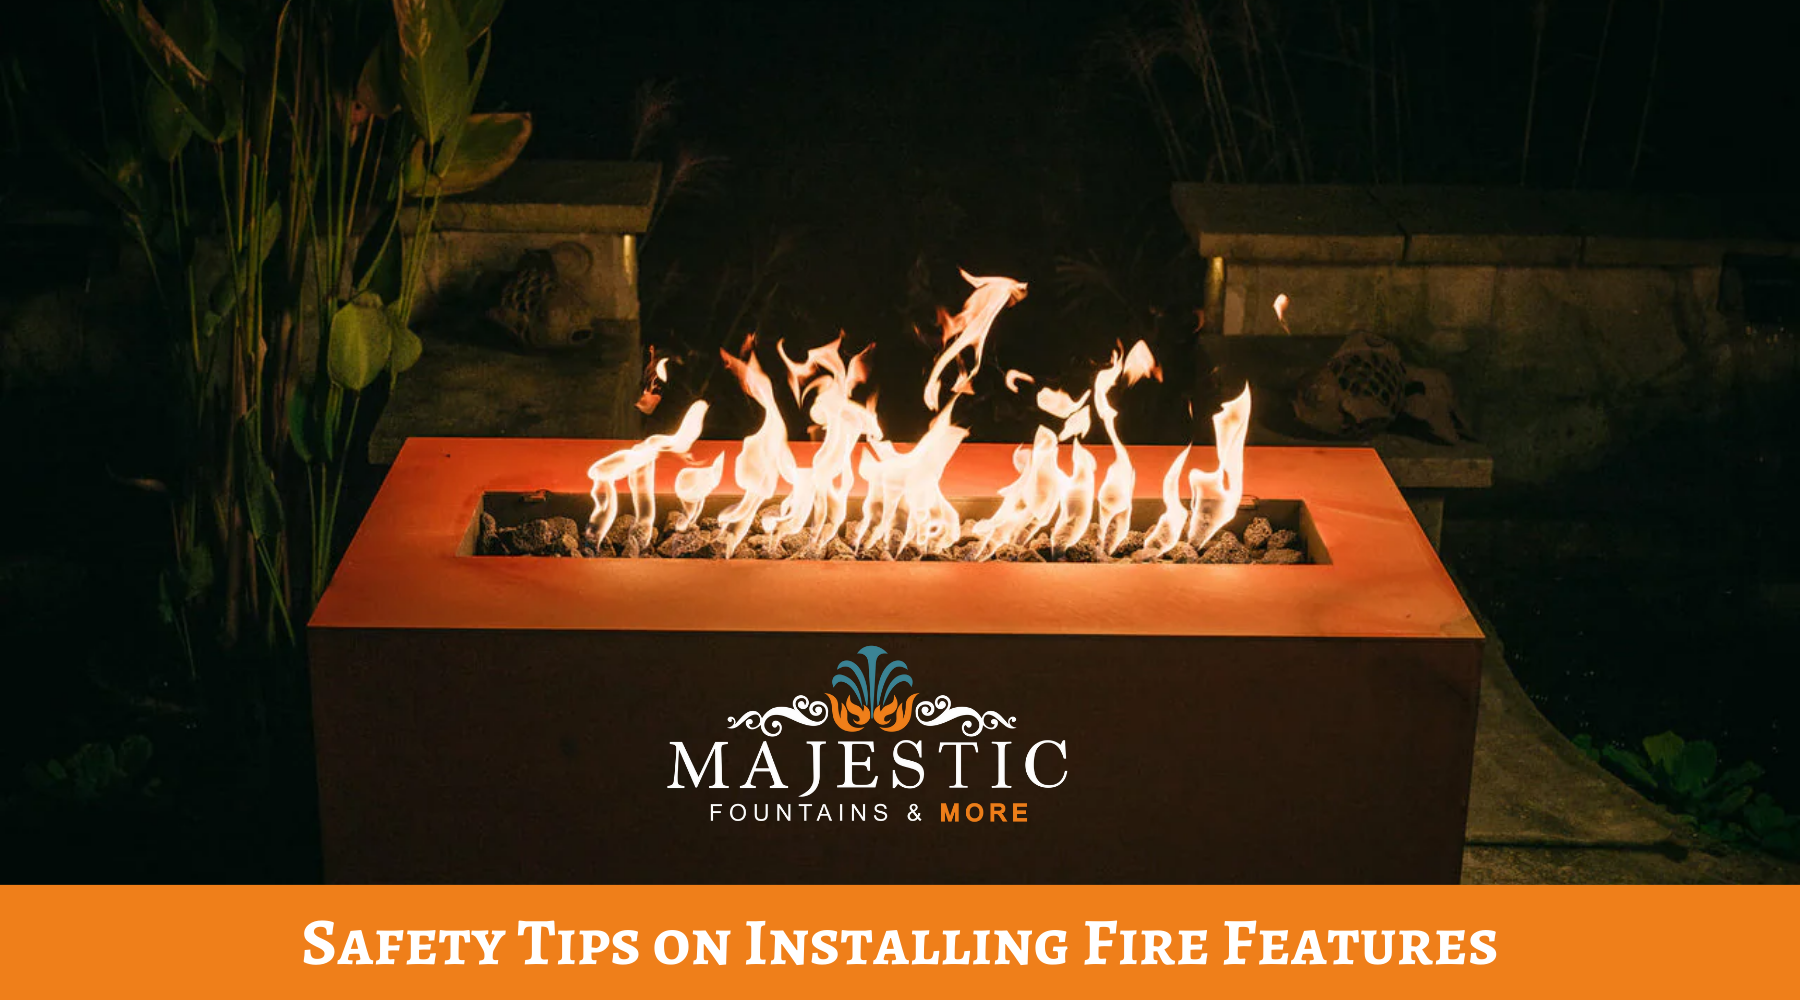 Safety Tips on Installing Fire Features